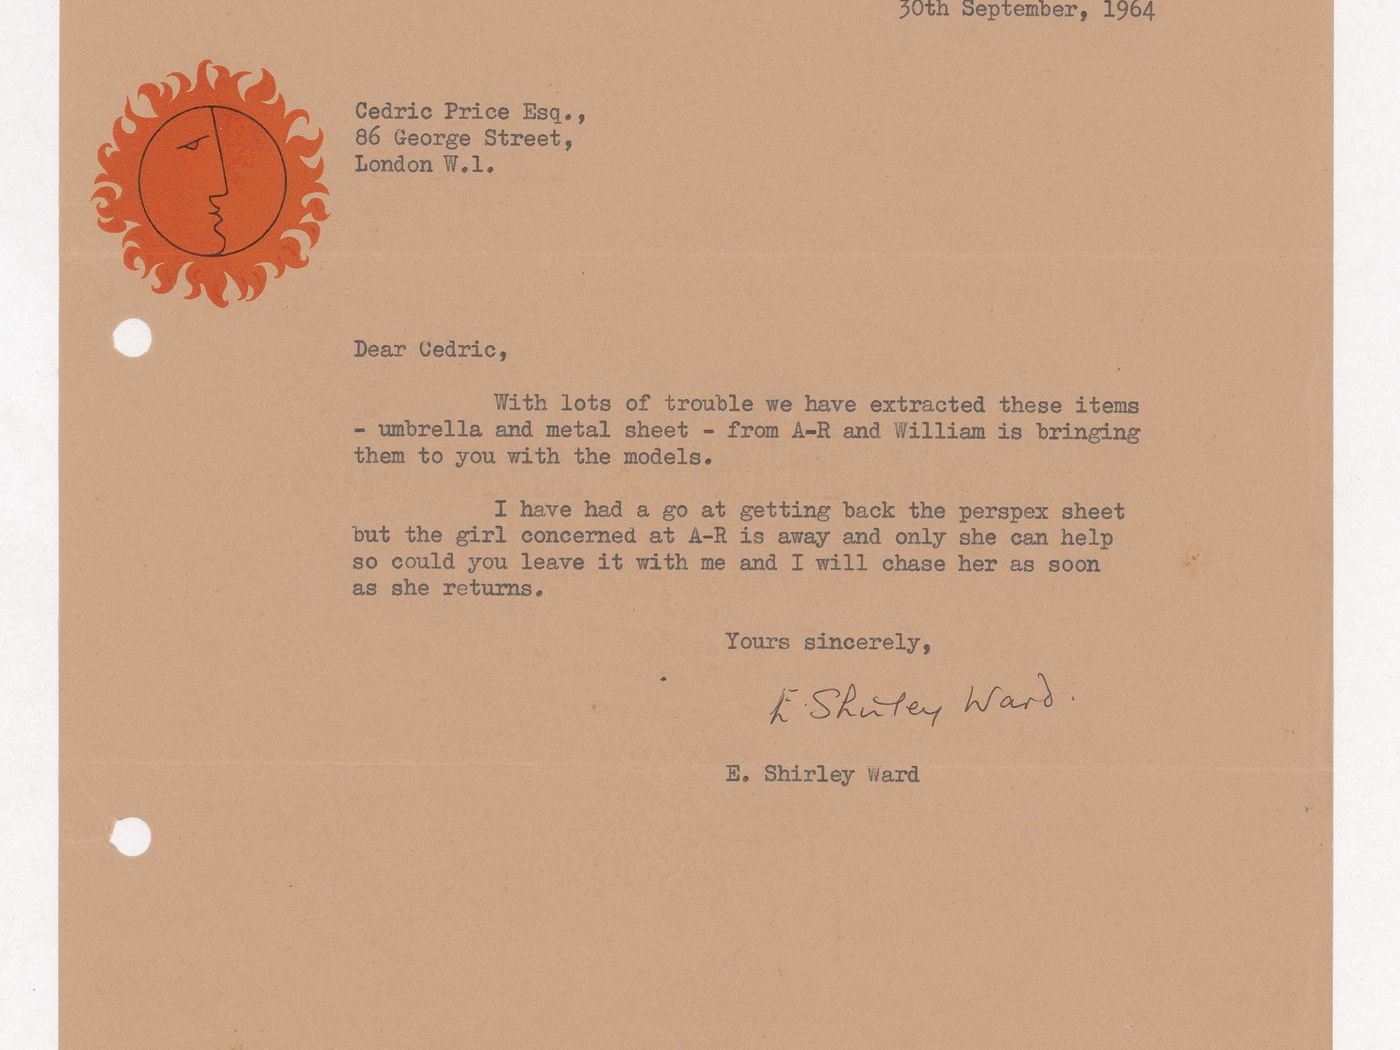 Letter from E. Shirley Ward of Mithras Films Unlimited to Cedric Price